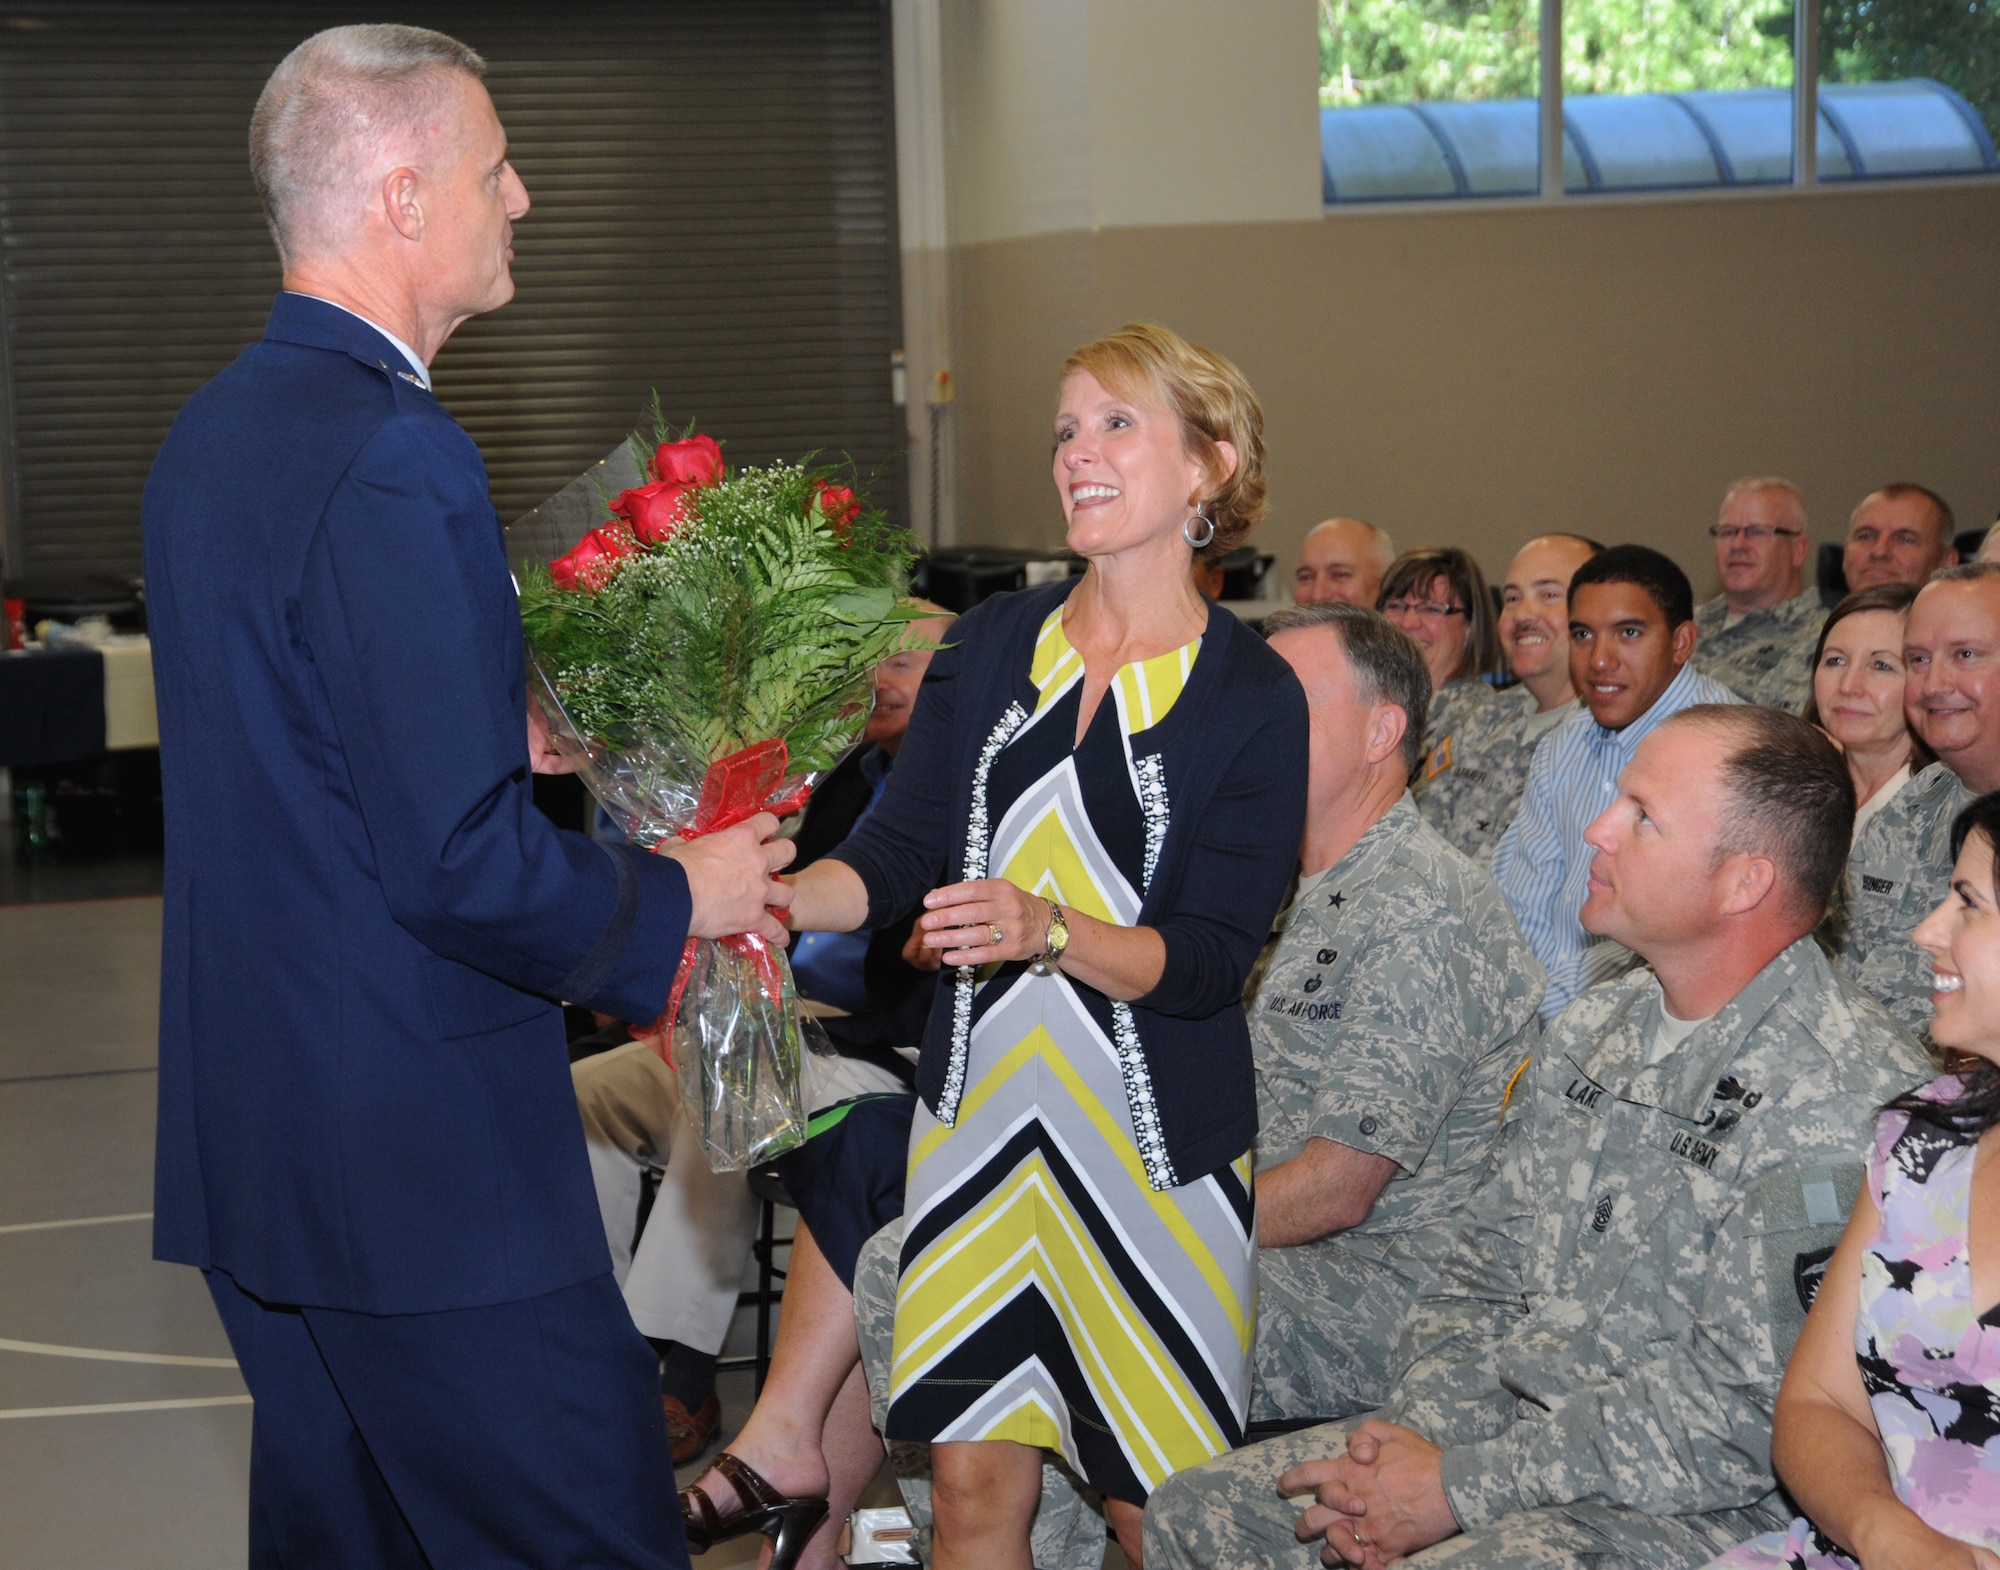 Brig. Gen. Steven Gregg presents flowers to his wife Linda Gregg, during the Change of Command and State Command Chief Change of Authority ceremony, Oregon Air National Guard held at the Anderson Readiness Center, Salem, Ore., Sept. 8, 2013. (Air National Guard photo by Tech. Sgt. John Hughel, 142nd Fighter Wing Public Affairs/Released) 